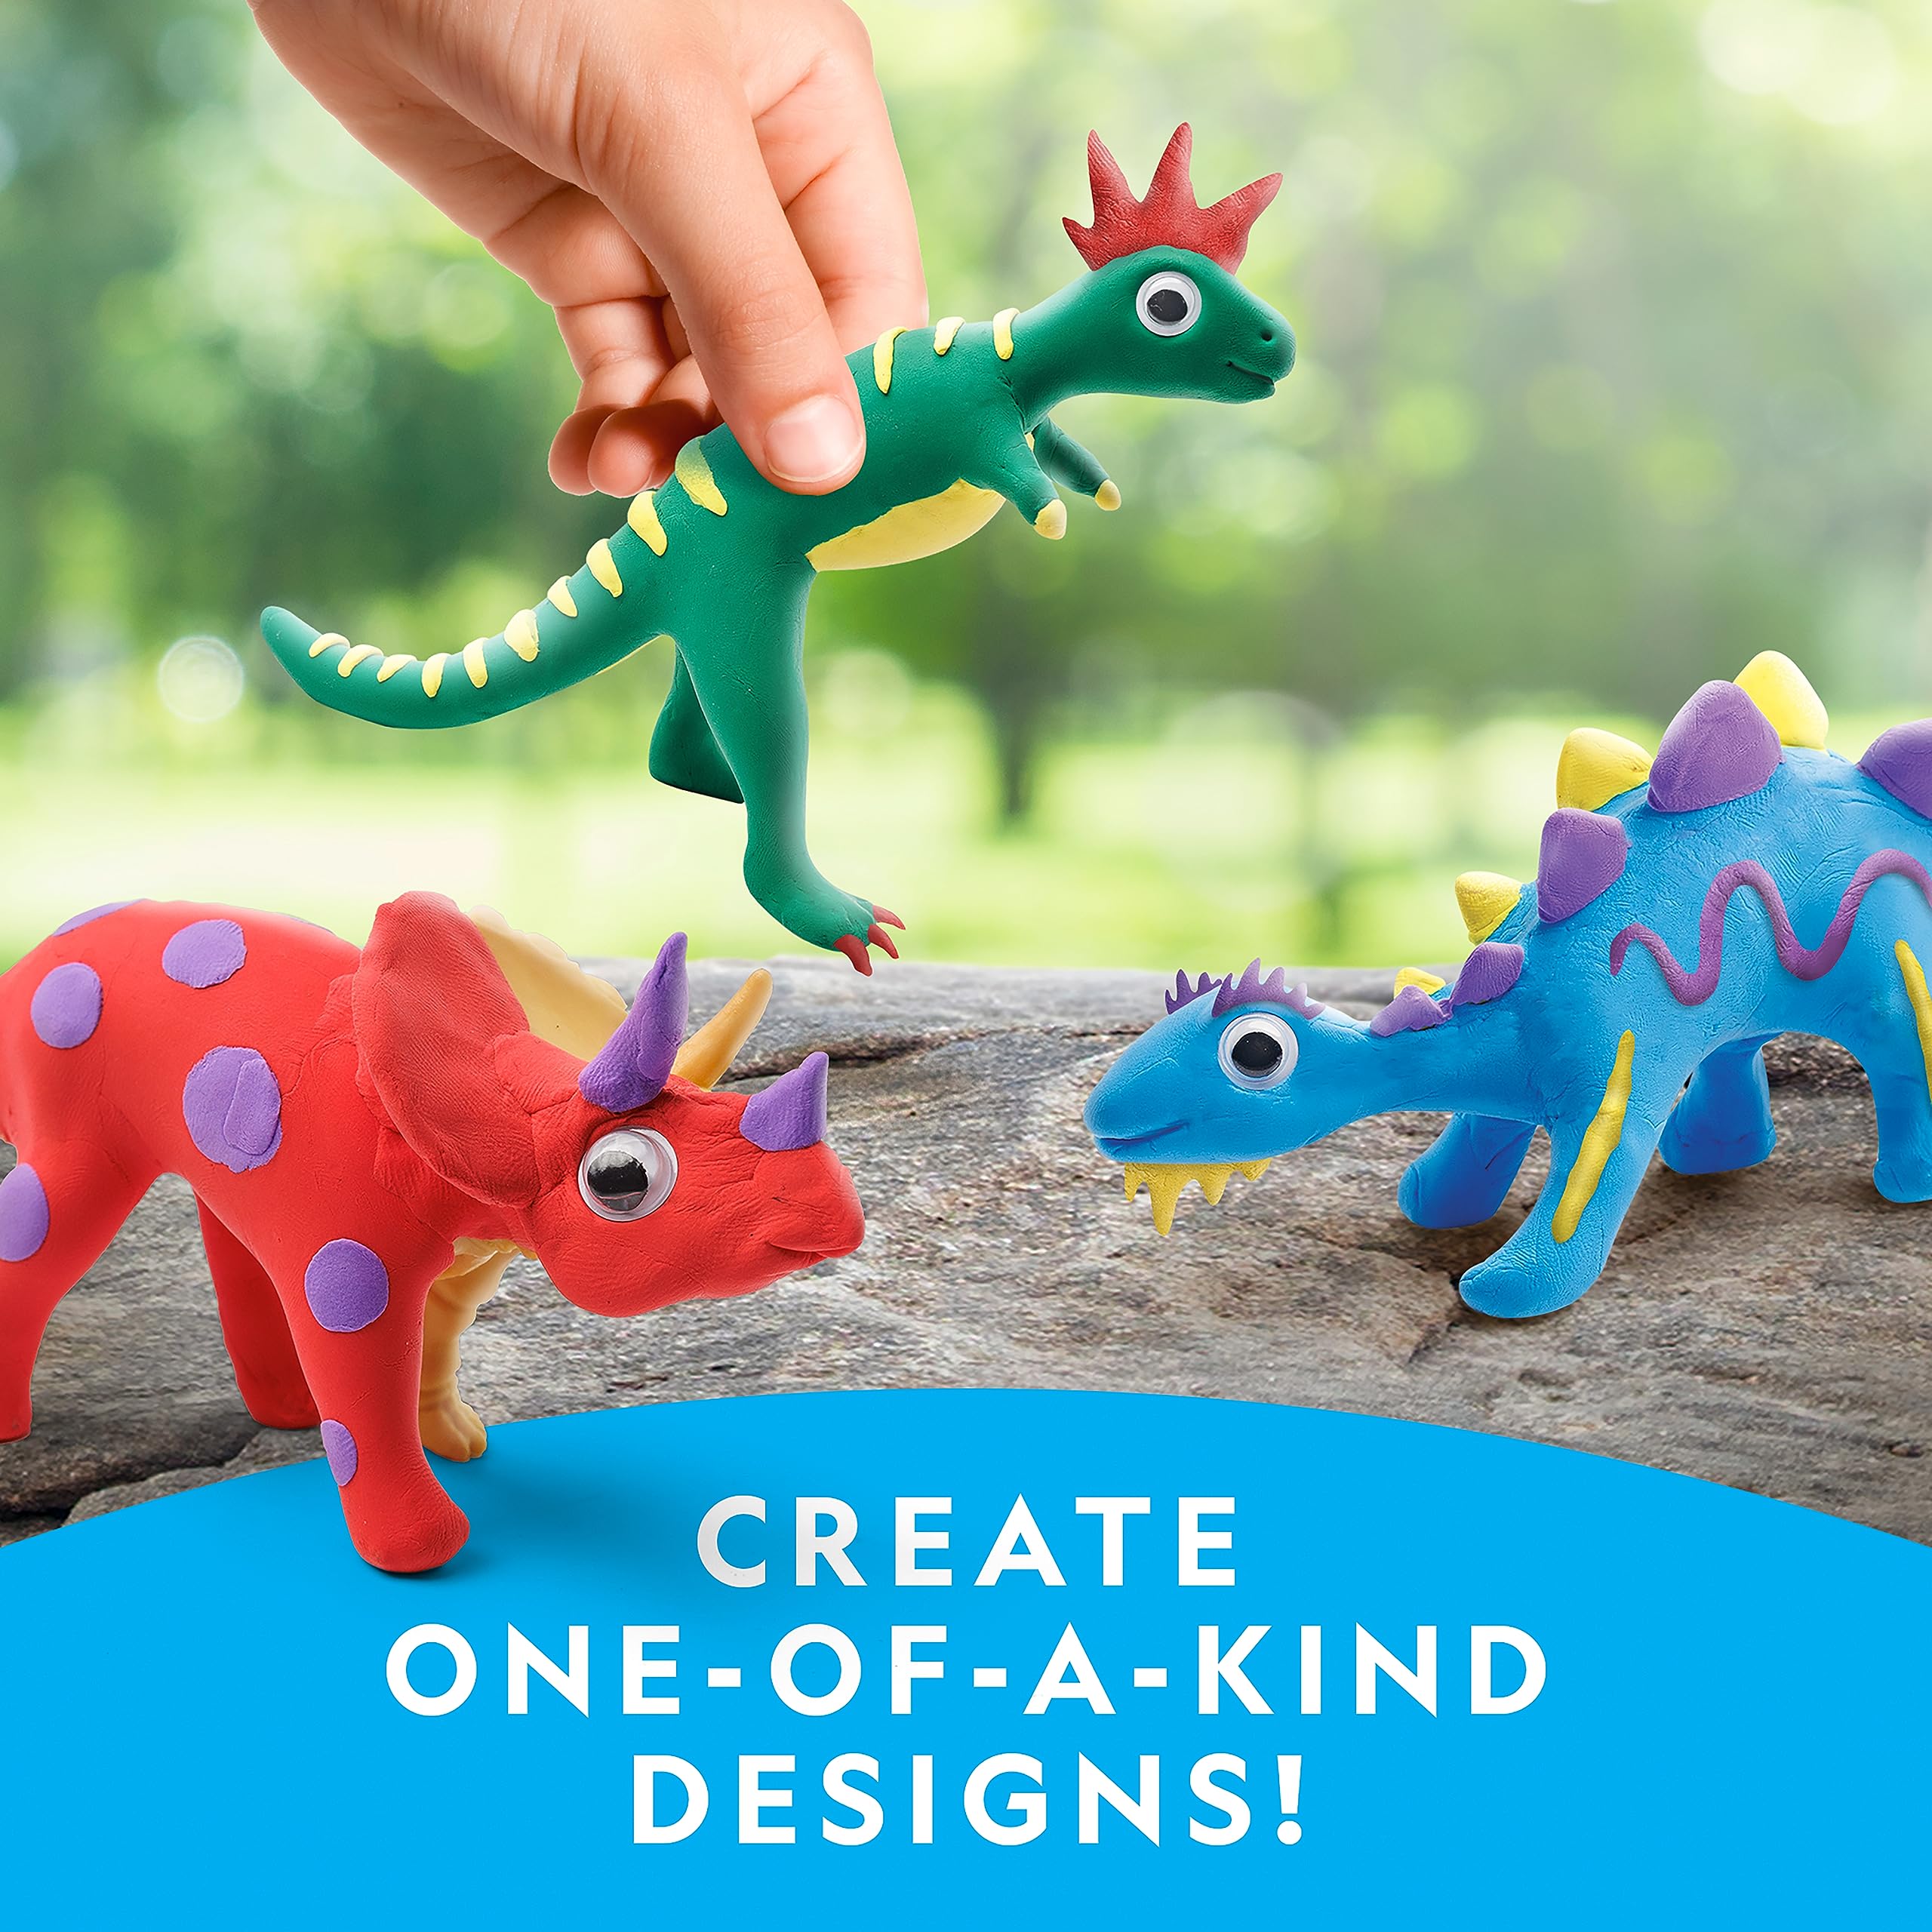 NATIONAL GEOGRAPHIC Clay Dinosaur Arts & Crafts Kit - Dinosaur Air Dry Clay for Kids Craft Kit with 5 Clay Colors, 5 Dino Skeletons, Sculpting Tool & Googly Eyes, Dinosaur Activity (Amazon Exclusive)